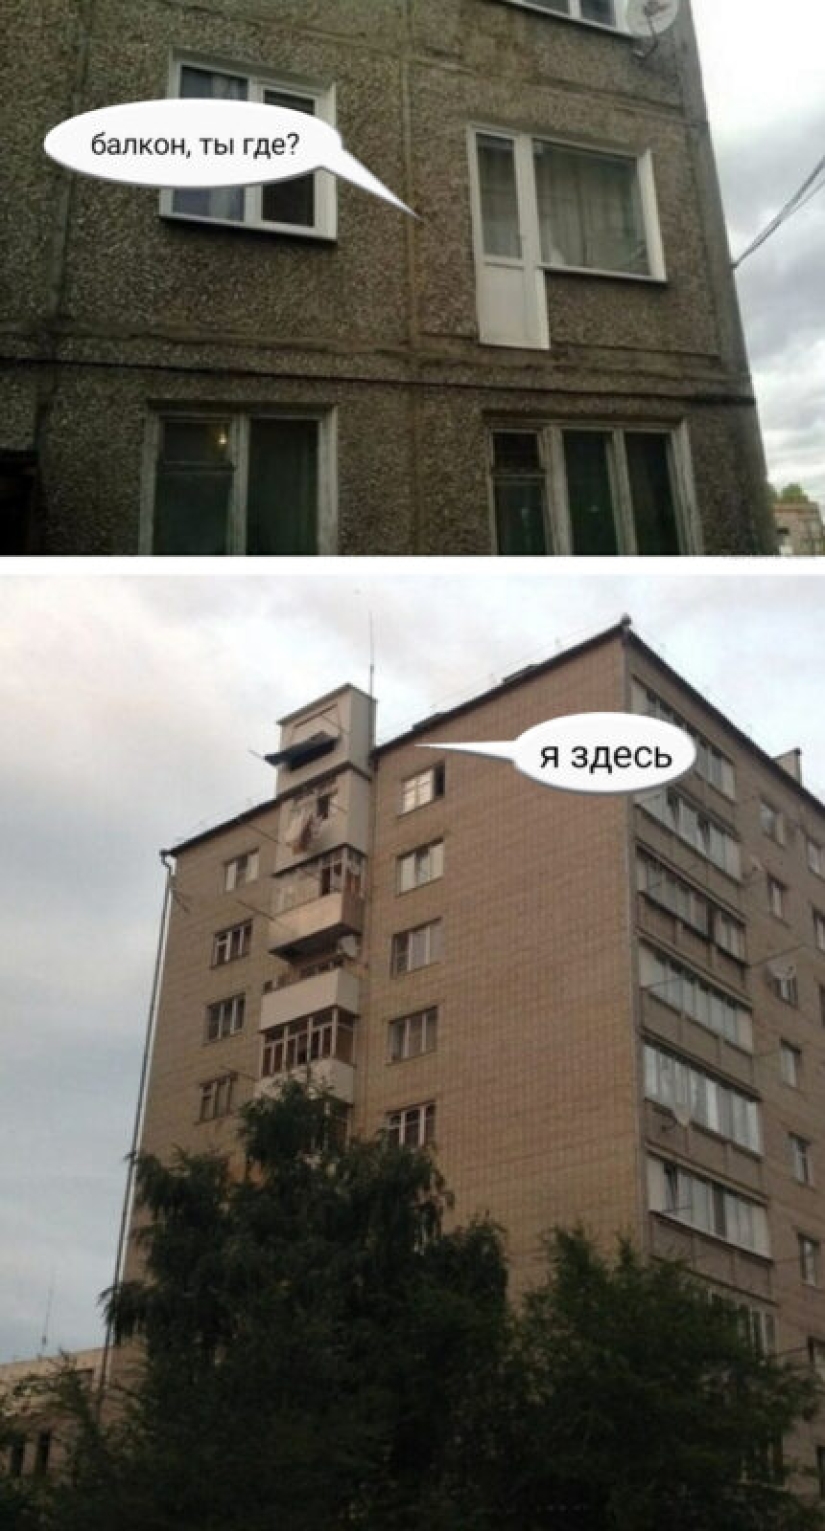 20 balconies that can tell a lot about cockroaches in the head of their owners